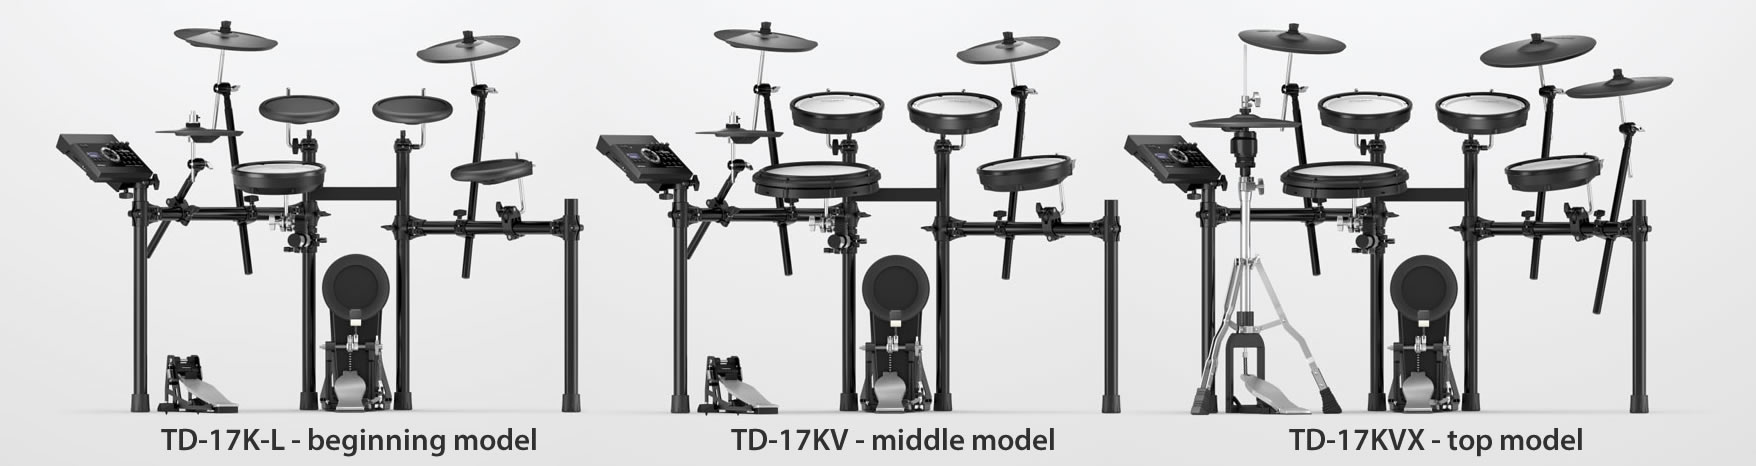 Roland TD-17 - the new V-Drums kits explained